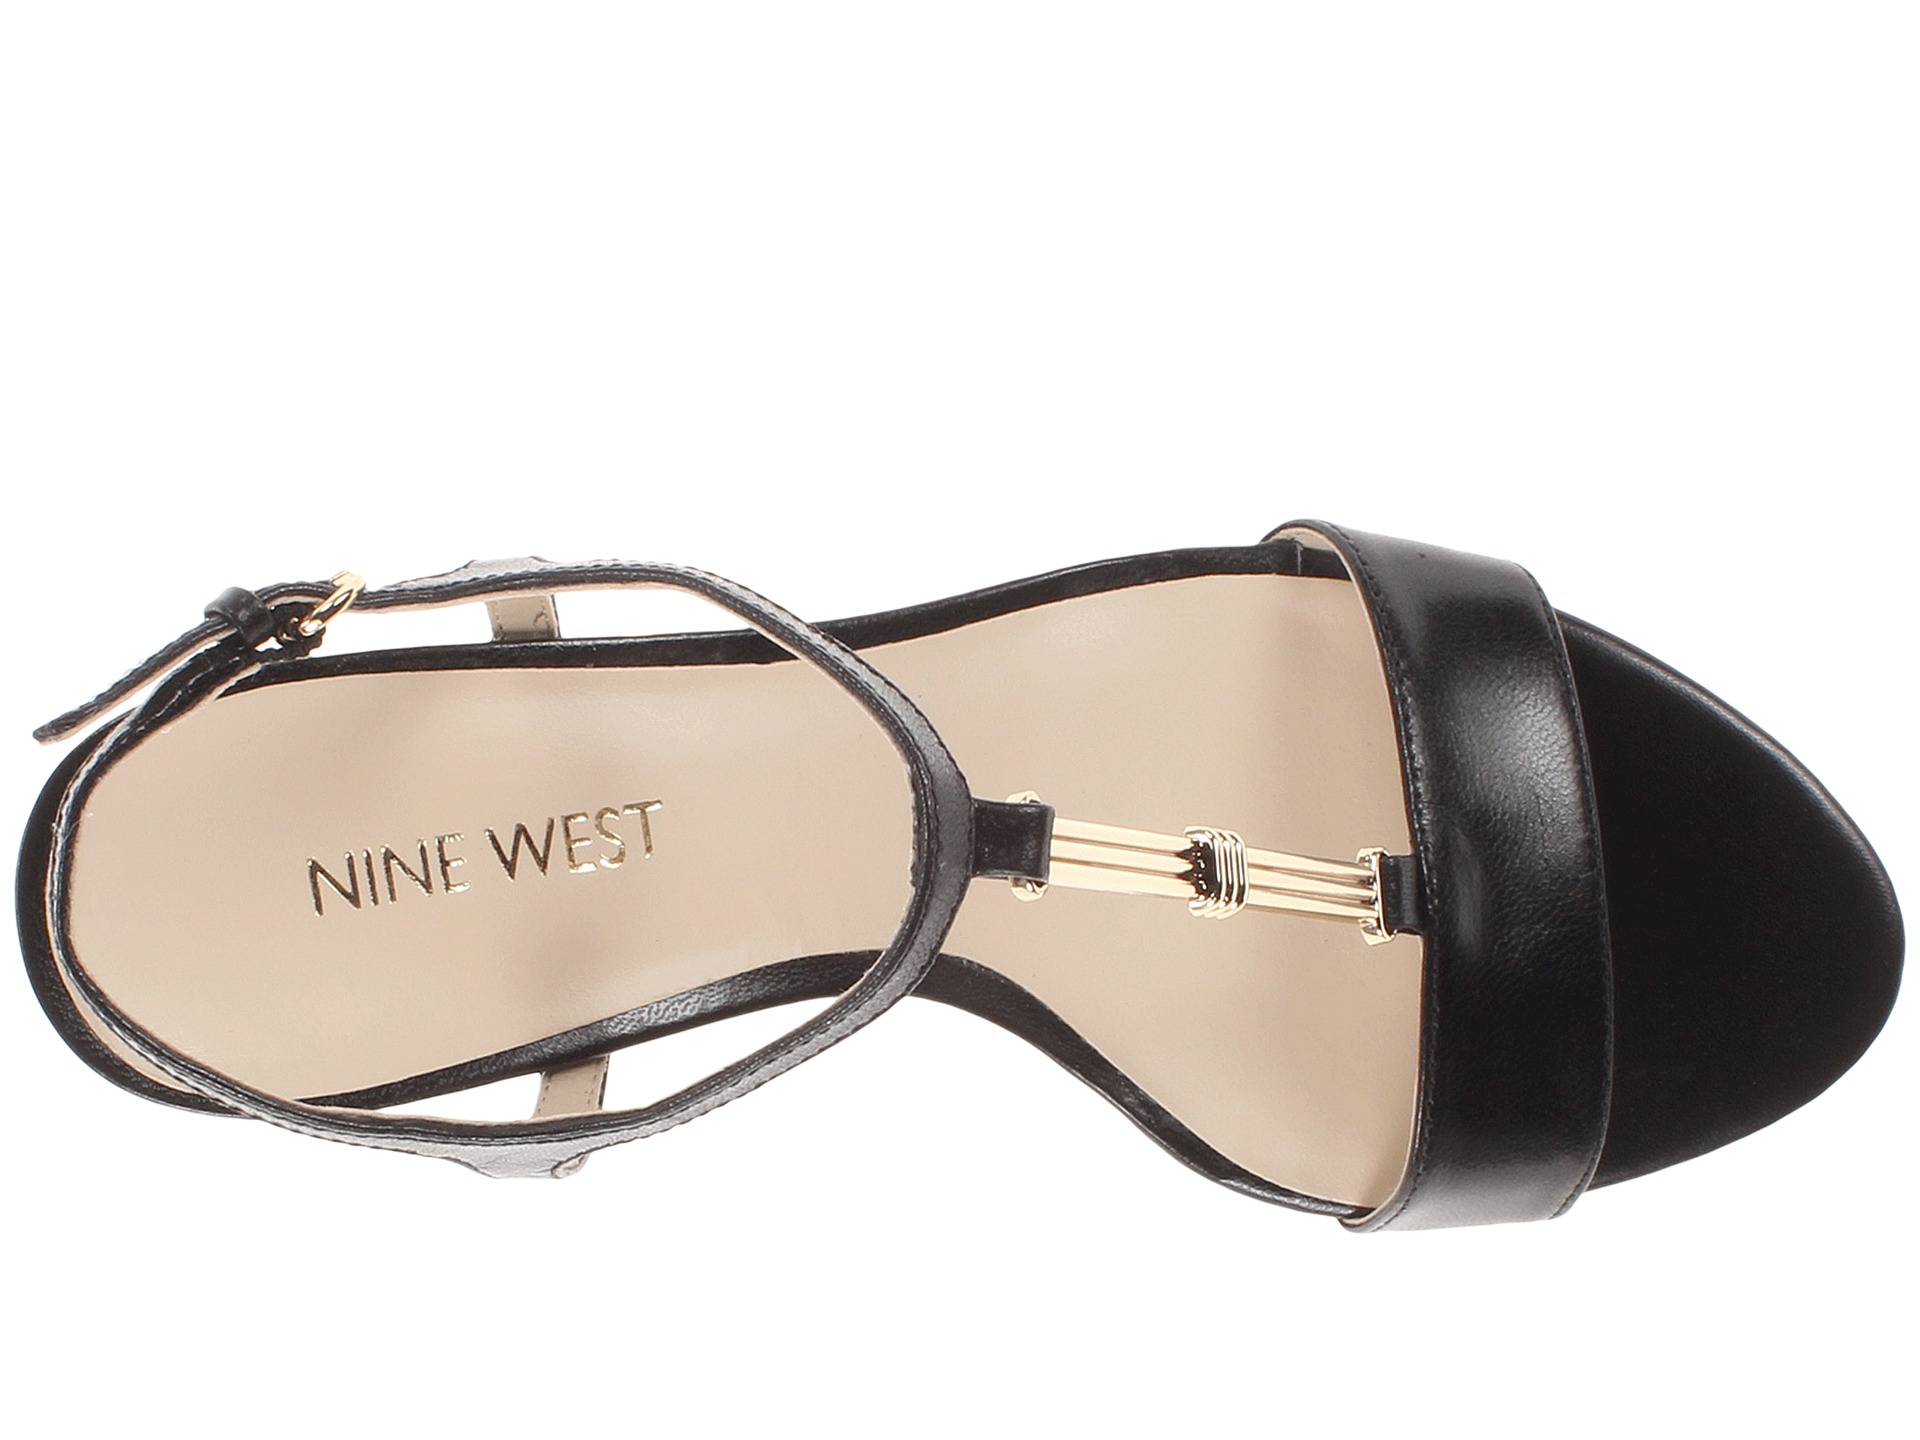 Nine West Heeled, Shoes | Shipped Free at Zappos